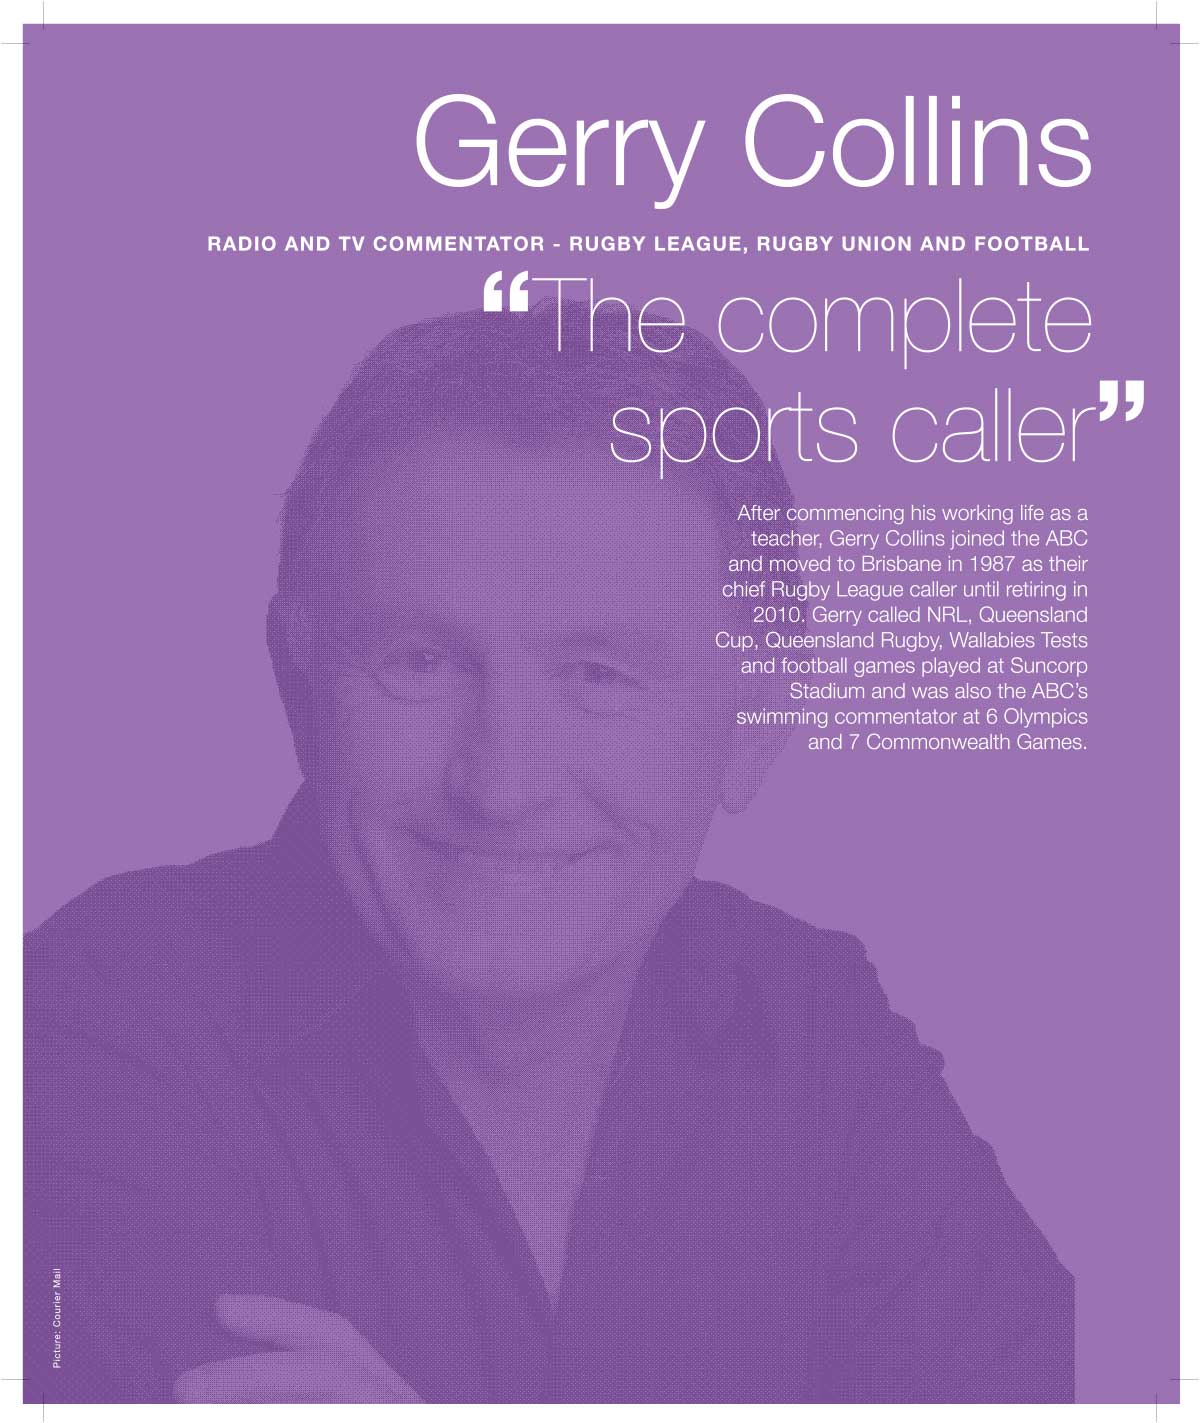 Gerry Collins media hall of fame